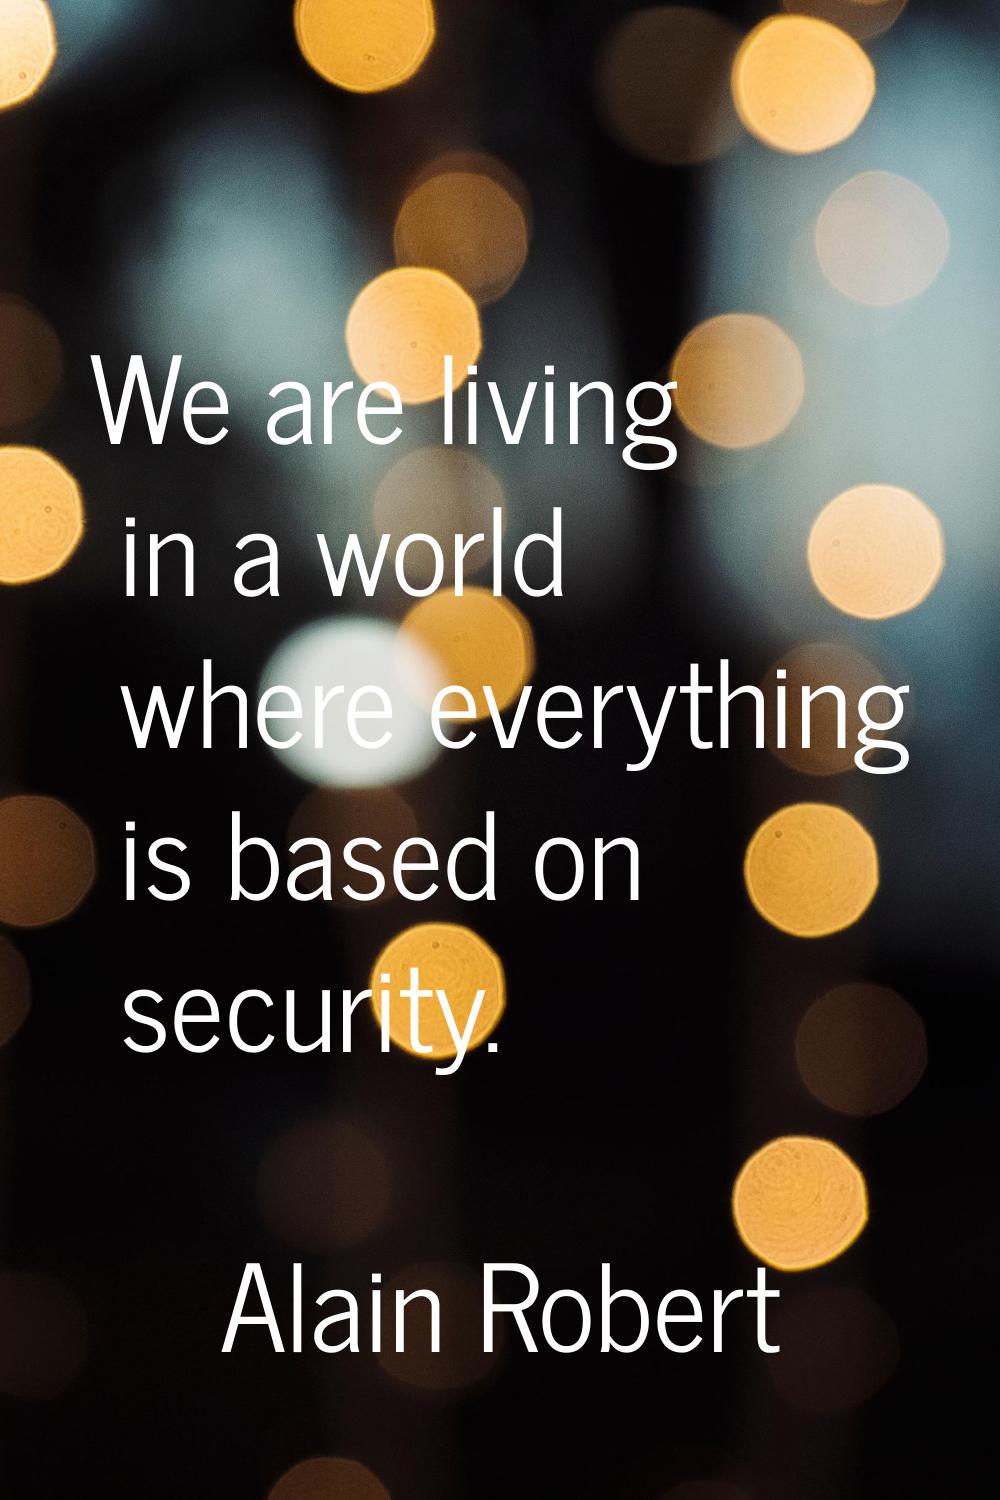 We are living in a world where everything is based on security.